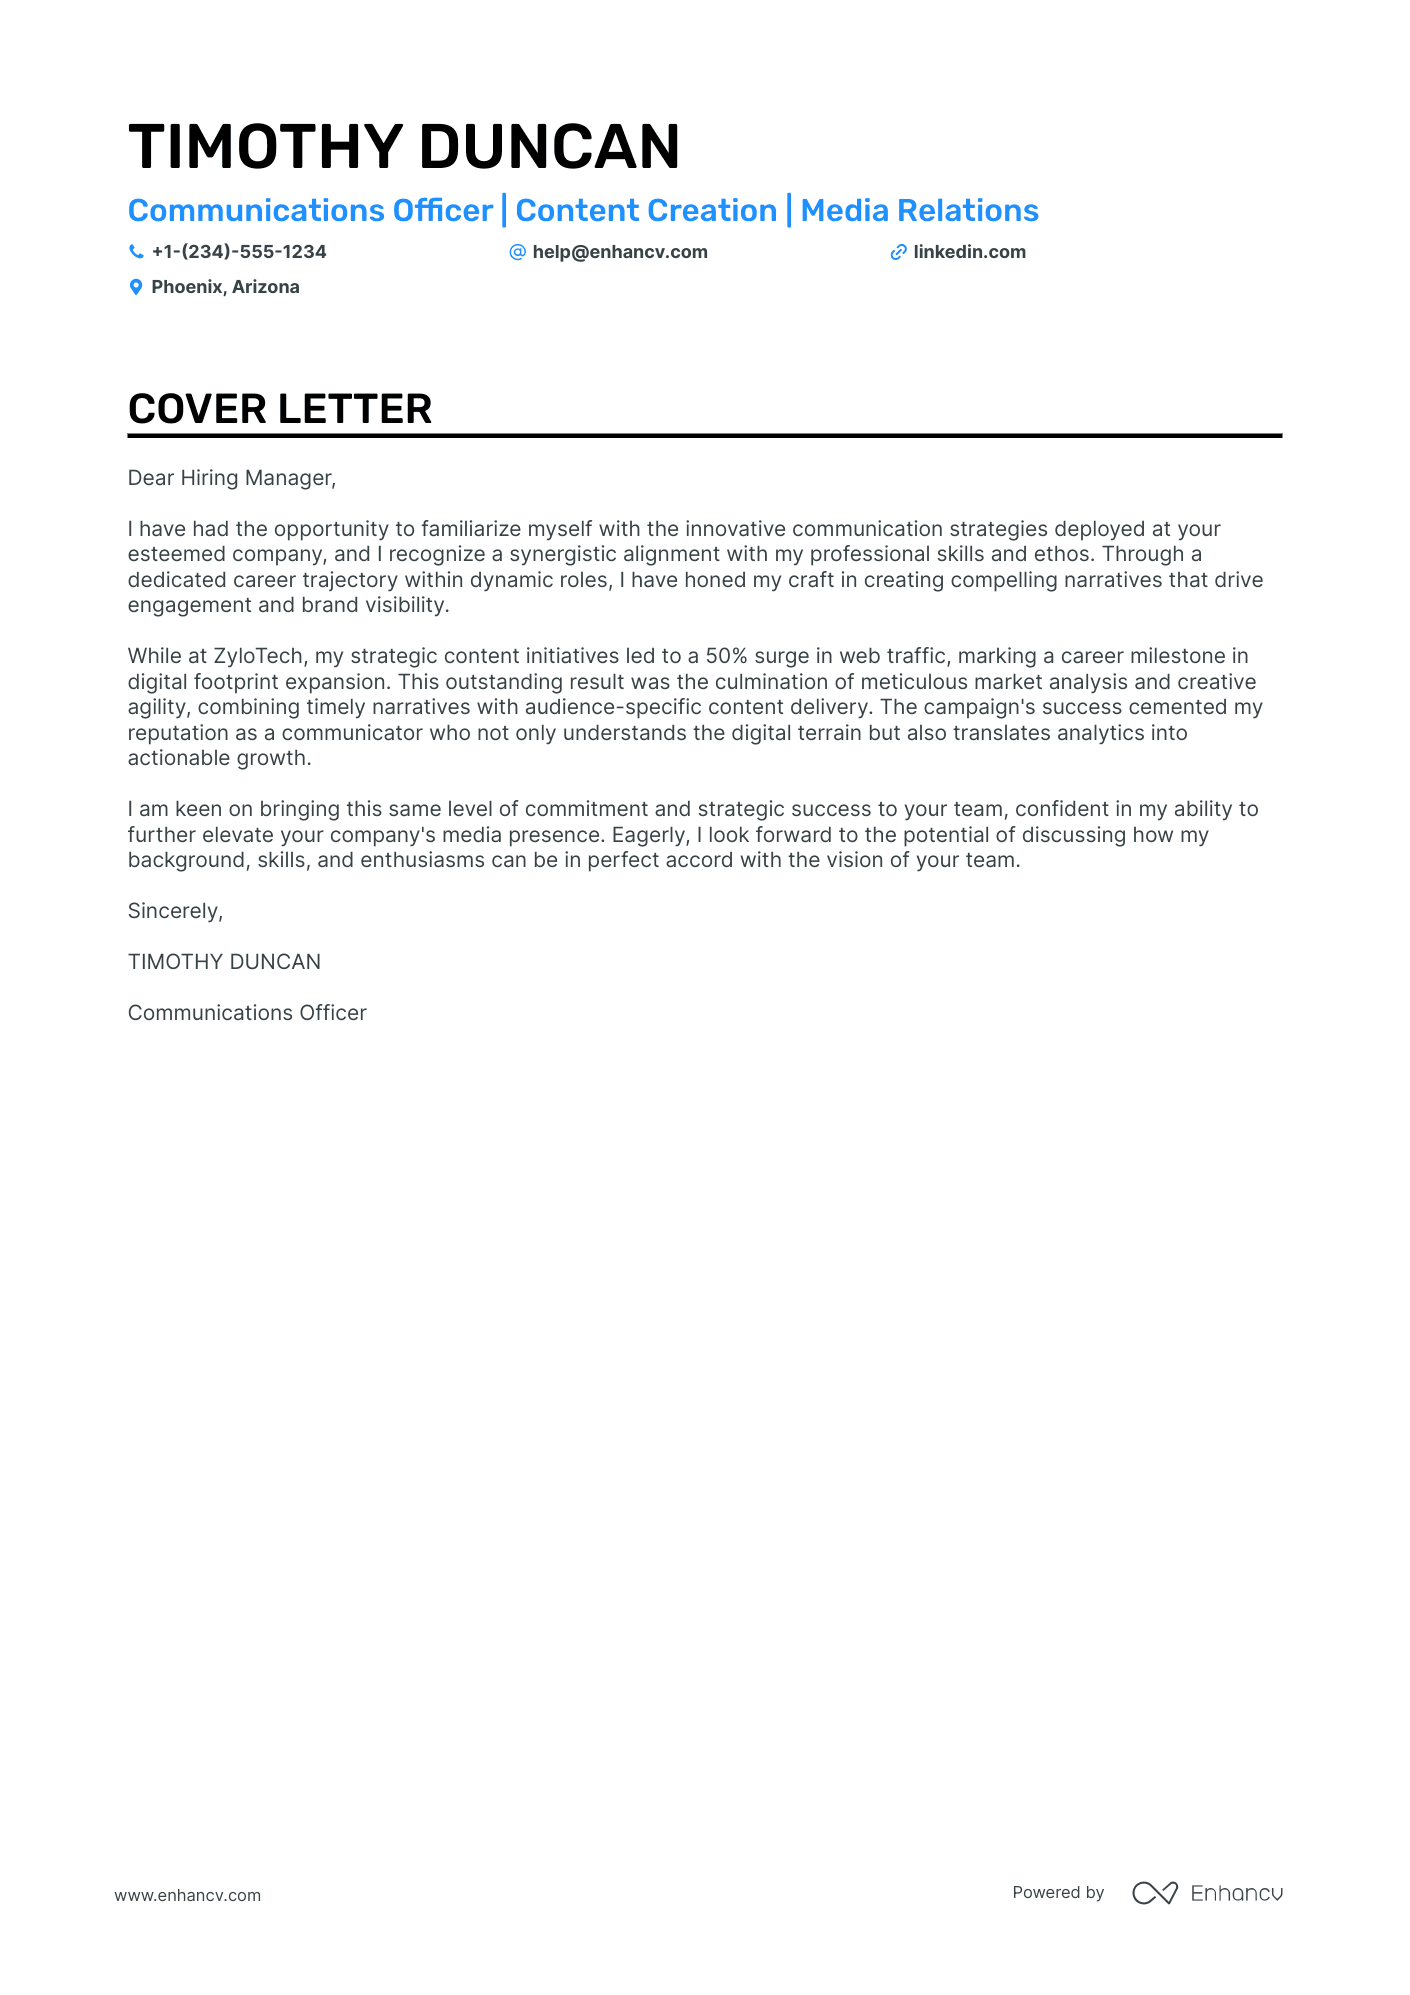 cover letter for a communications position